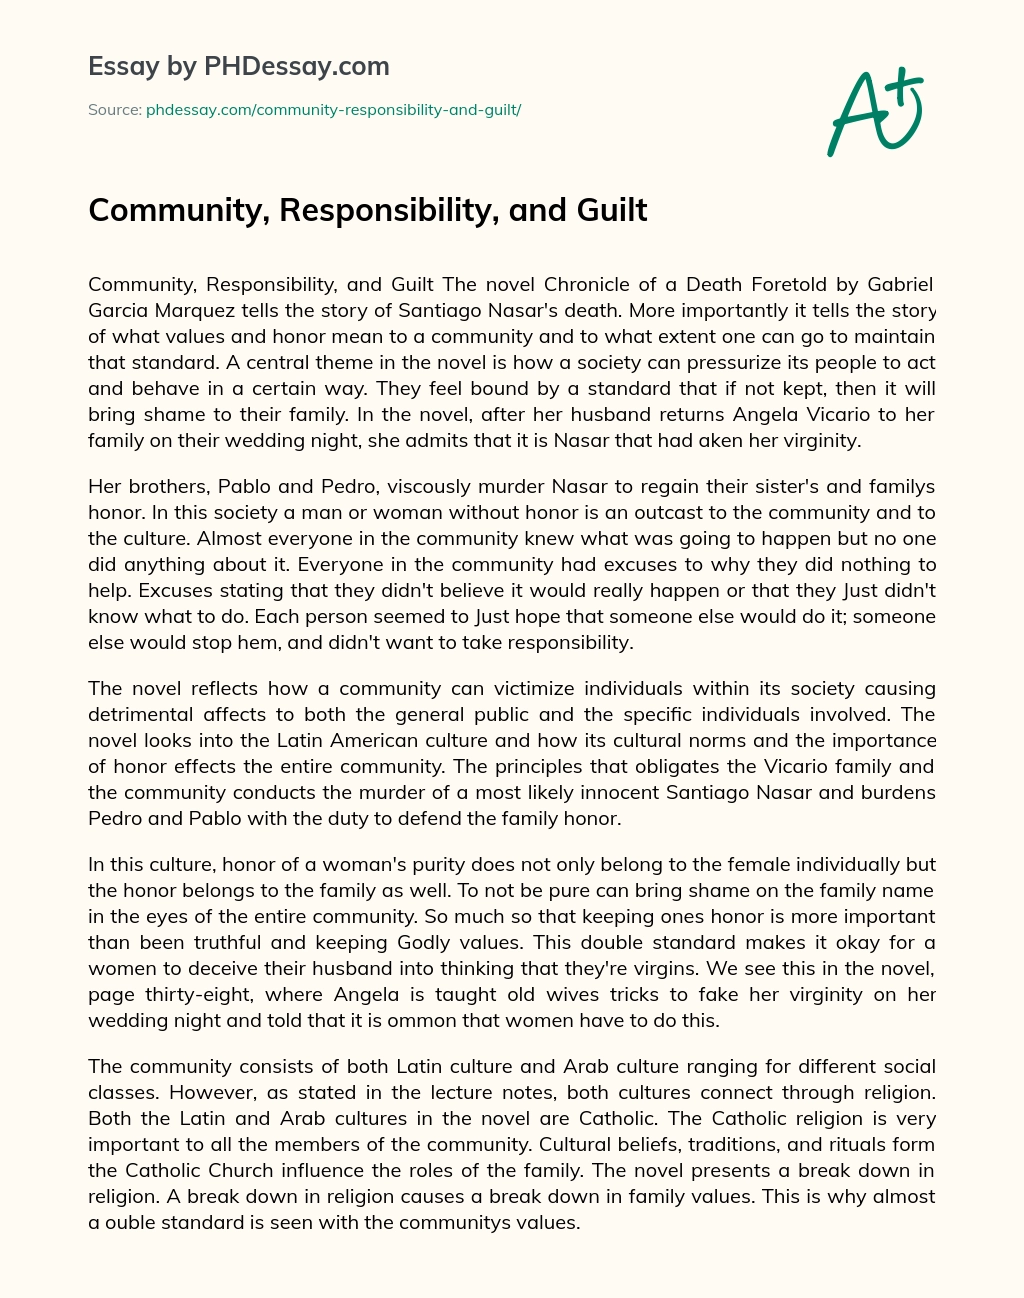 Community, Responsibility, and Guilt essay